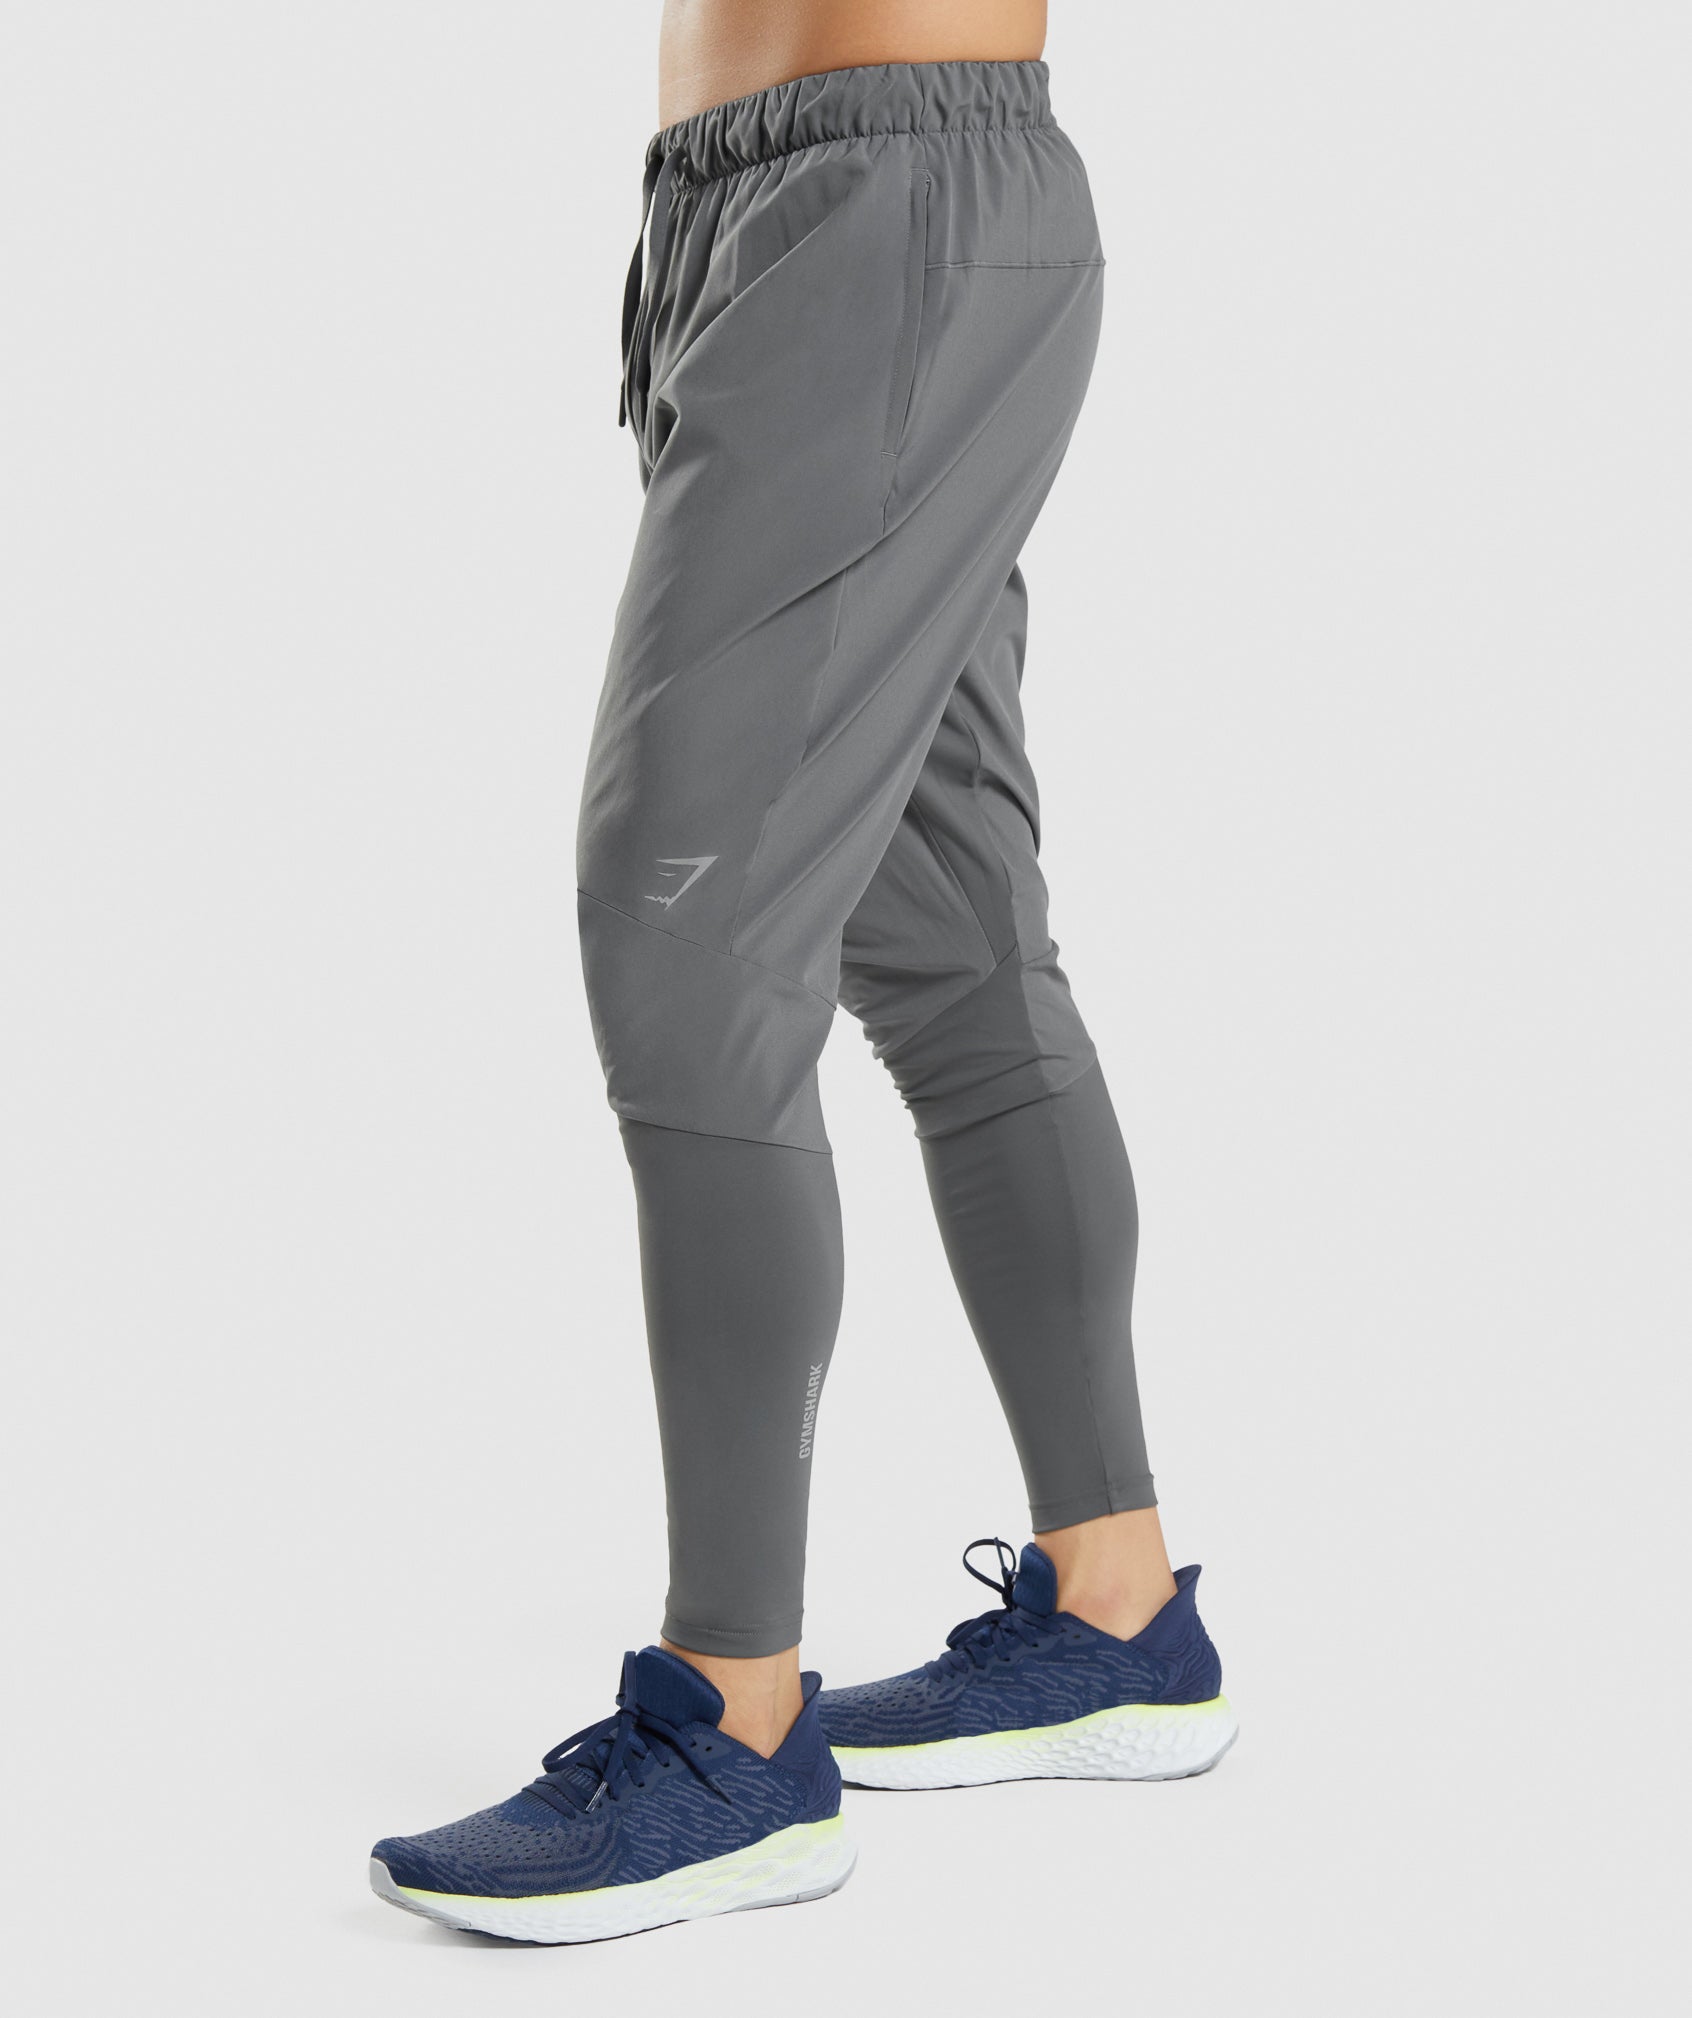 Speed Joggers in Charcoal